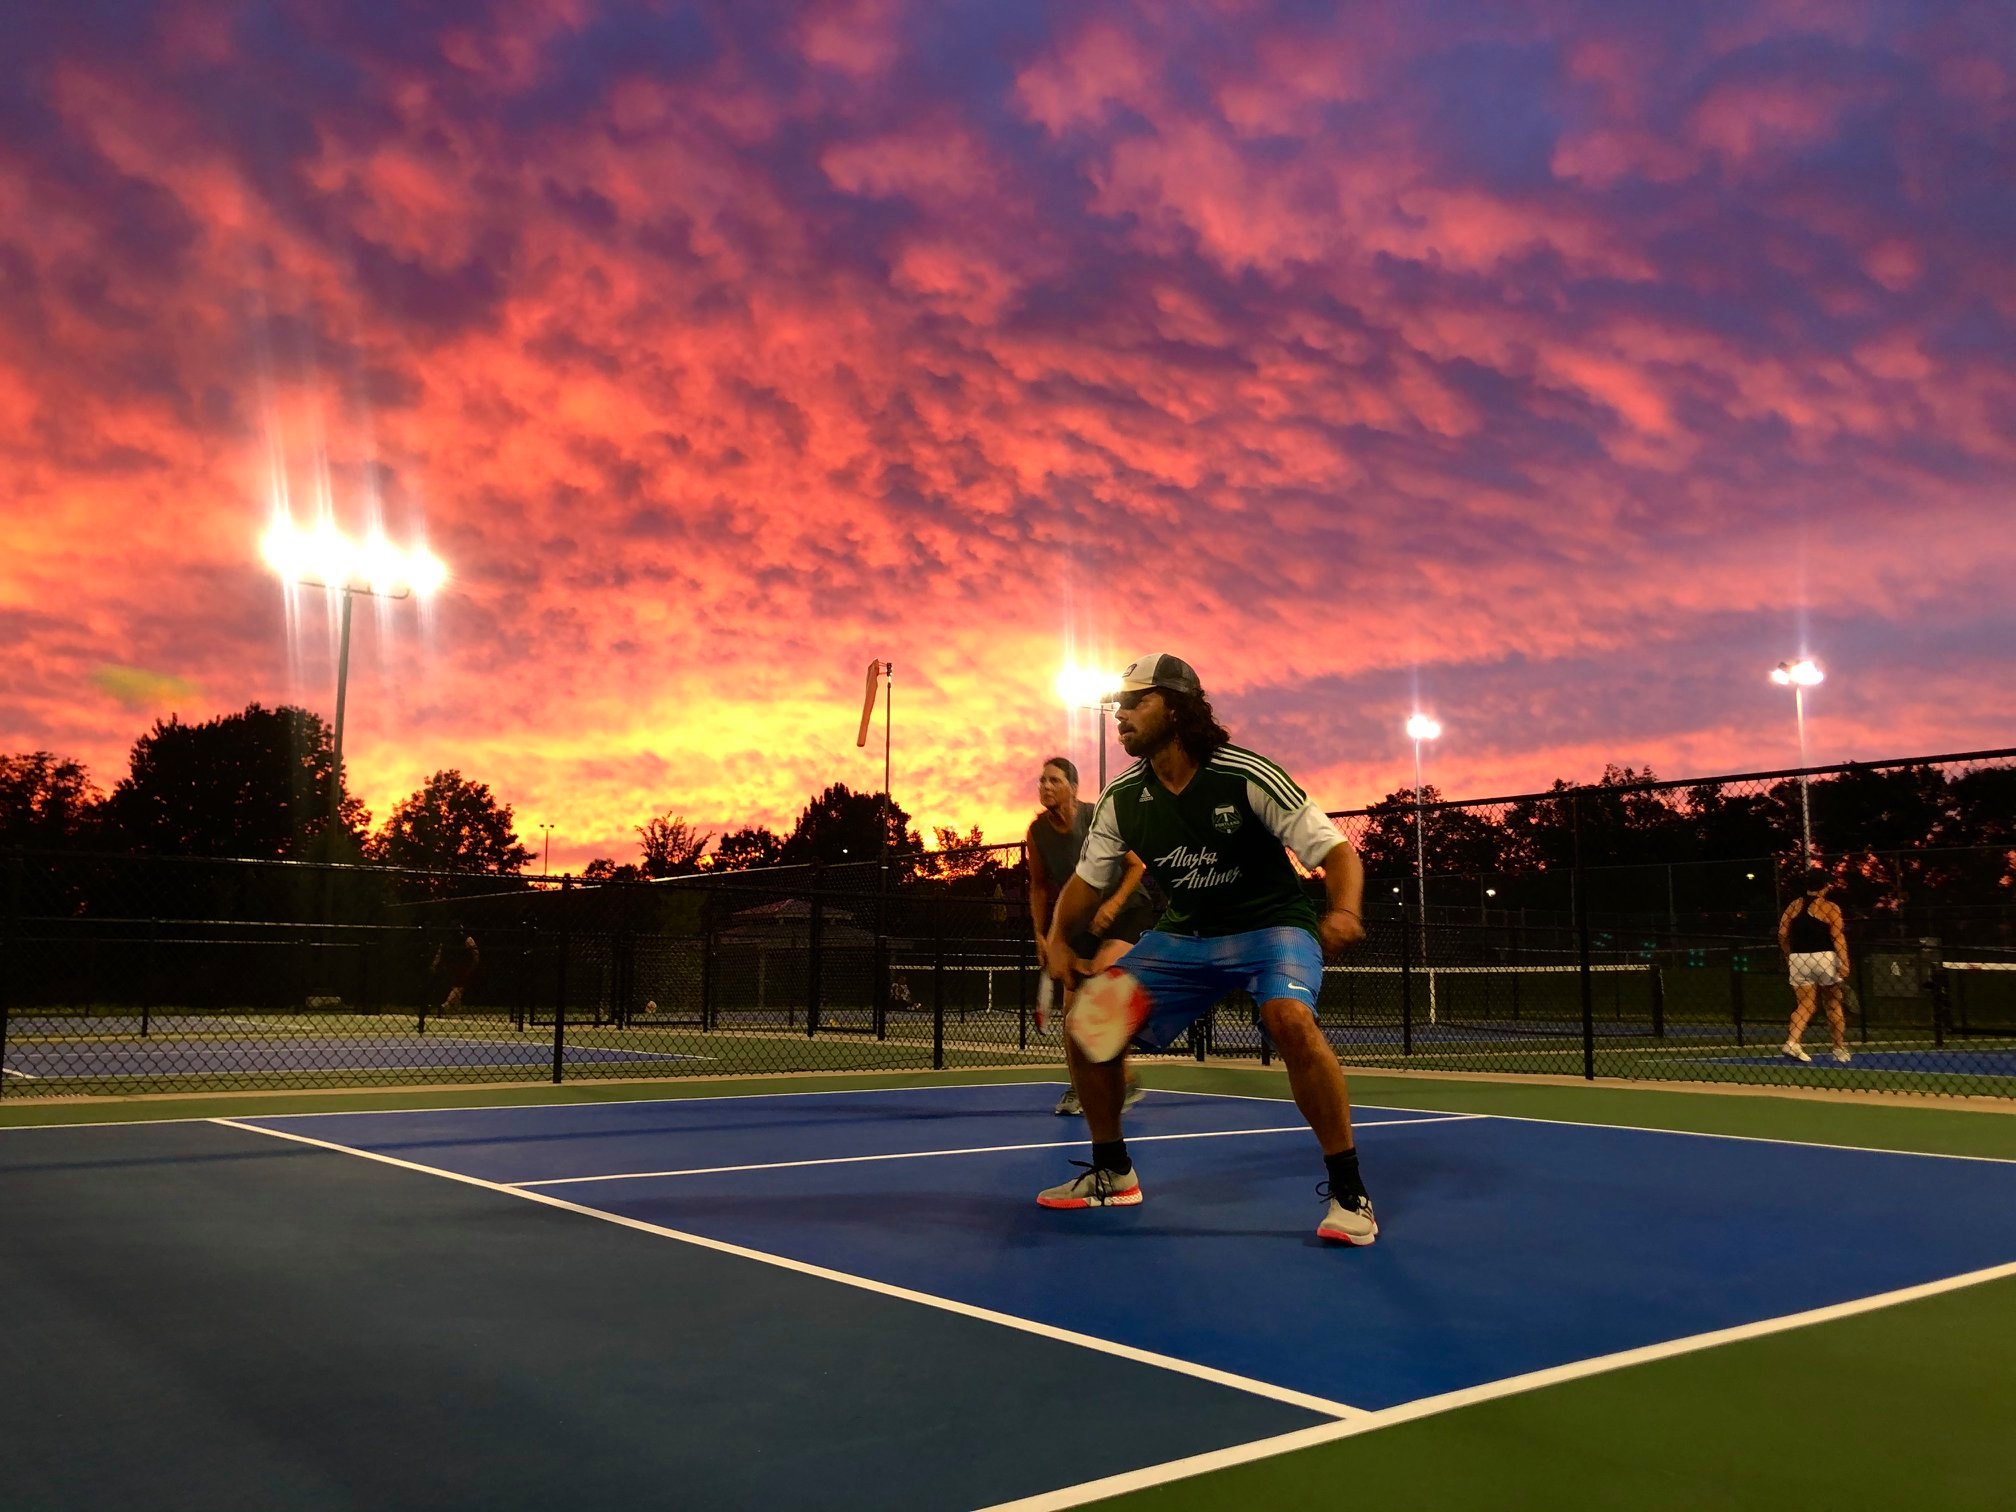 sunset with pickleball play with a Photo by Denver Metro Pickleball Association